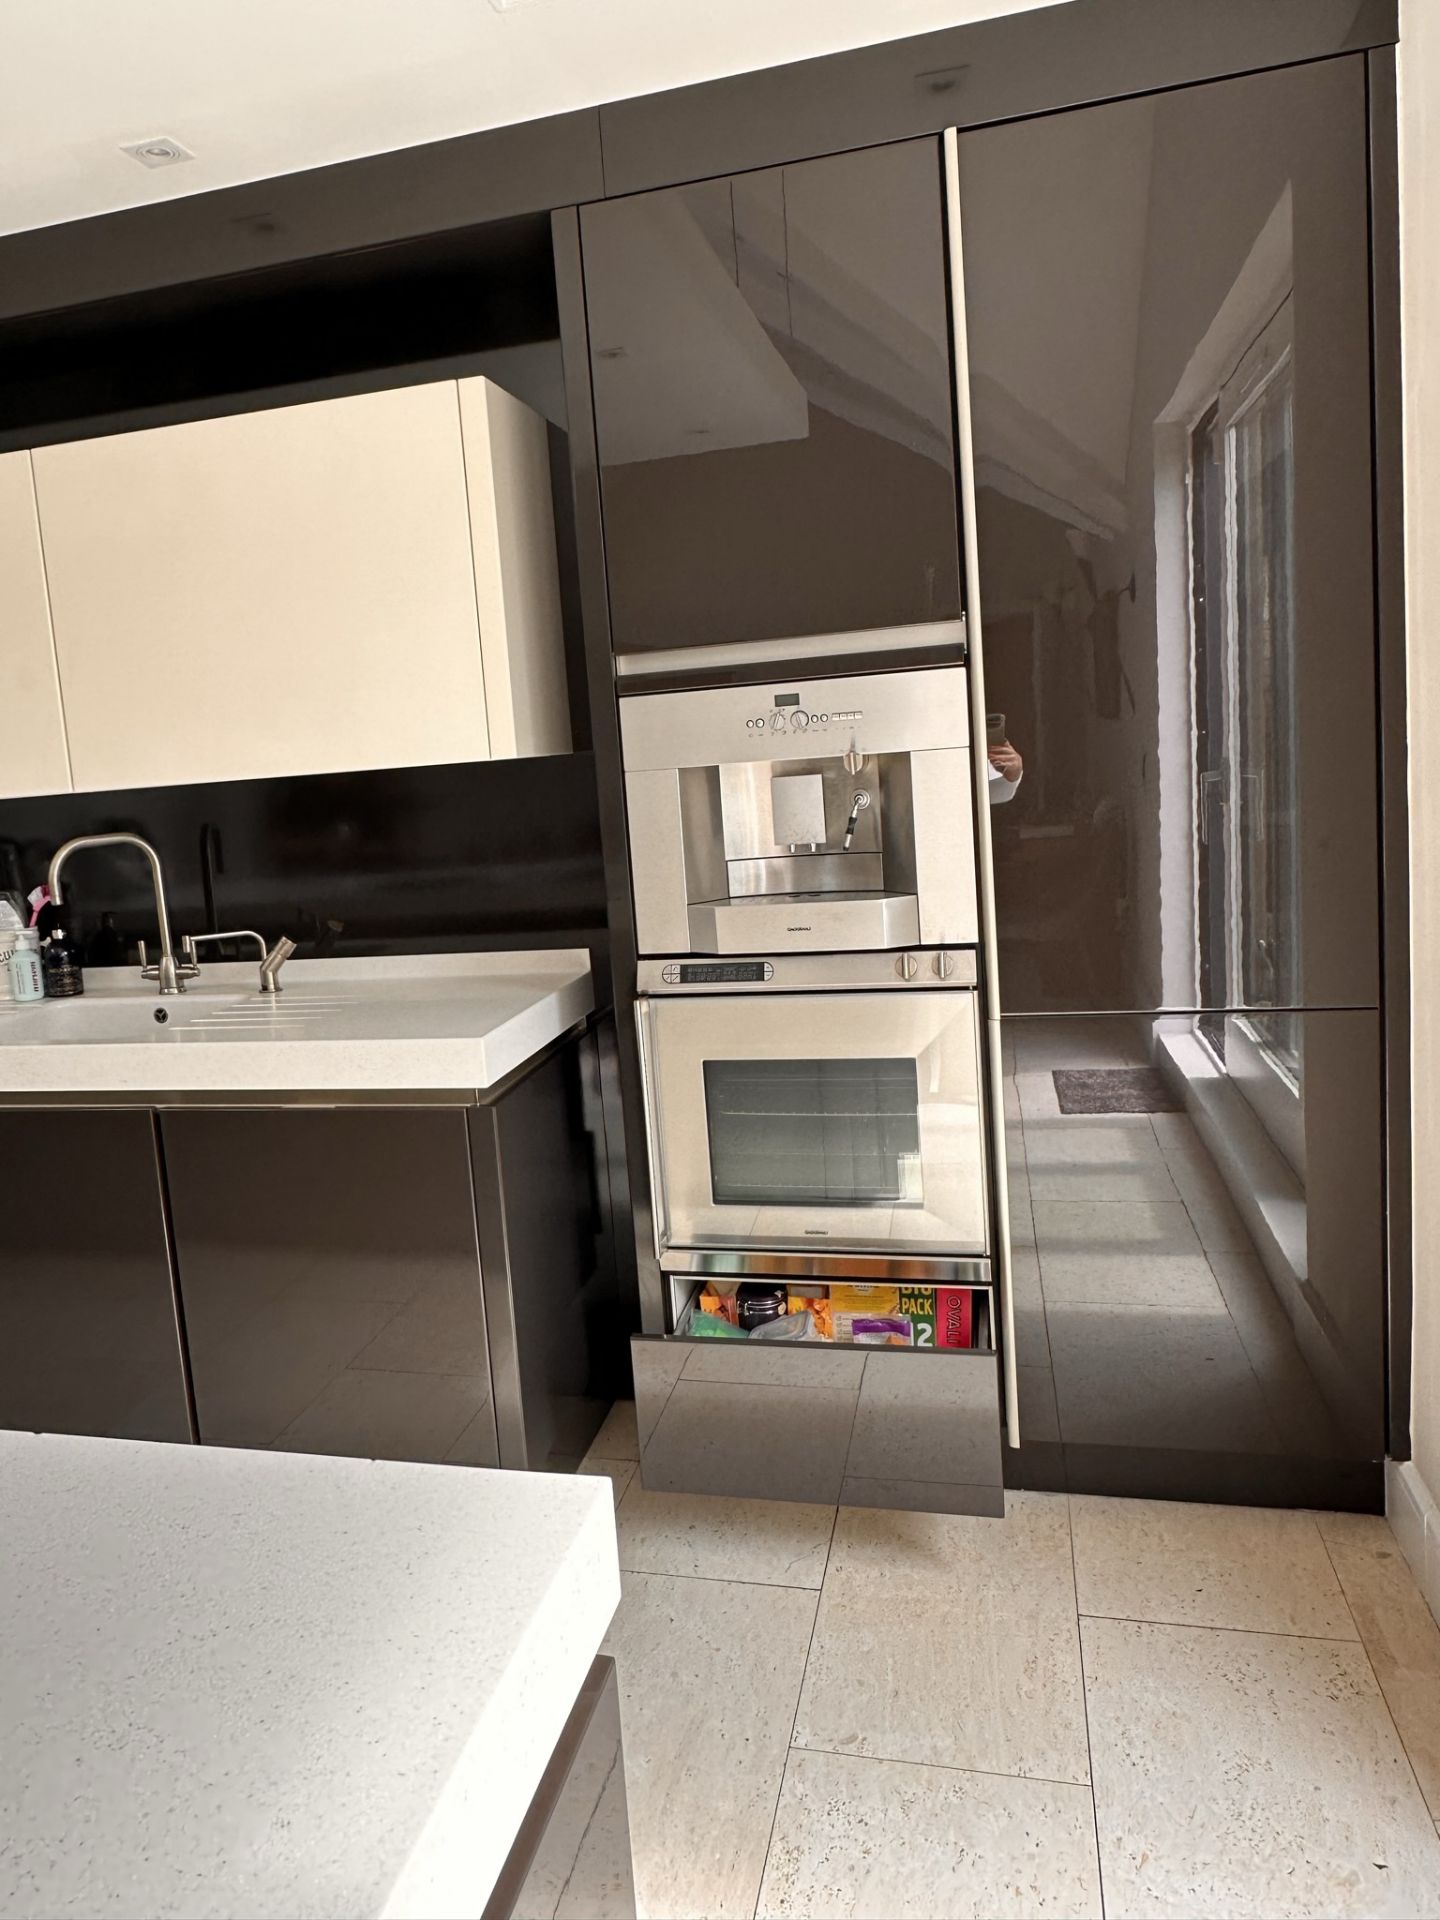 1 x Stunning Bespoke Siematic Gloss Fitted Kitchen With Corian Worktops - In Excellent Condition - - Image 7 of 94